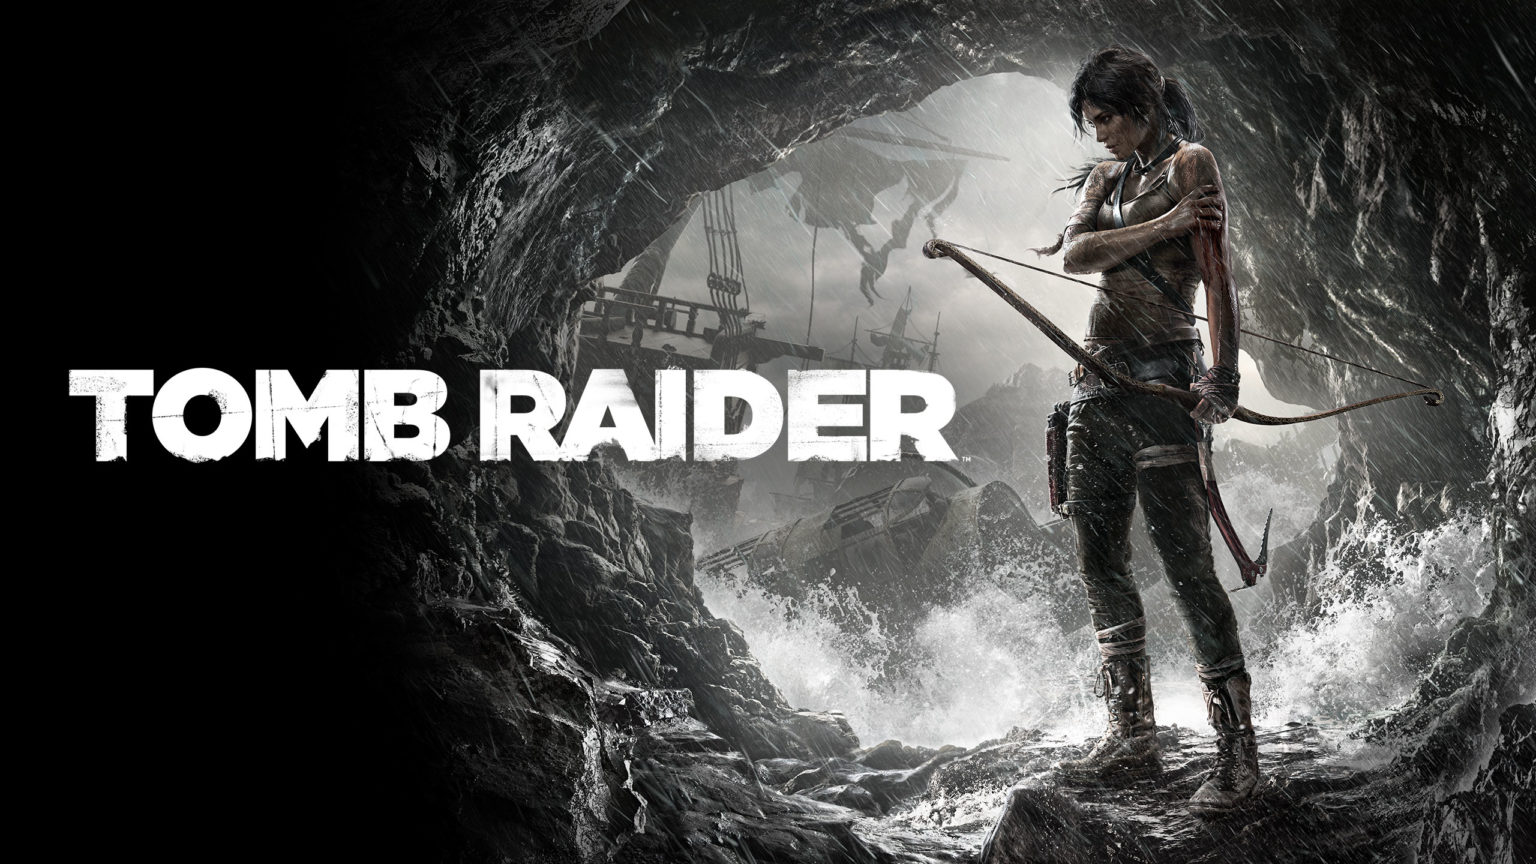 TOMB RAIDER ALL GAMES IN ORDER